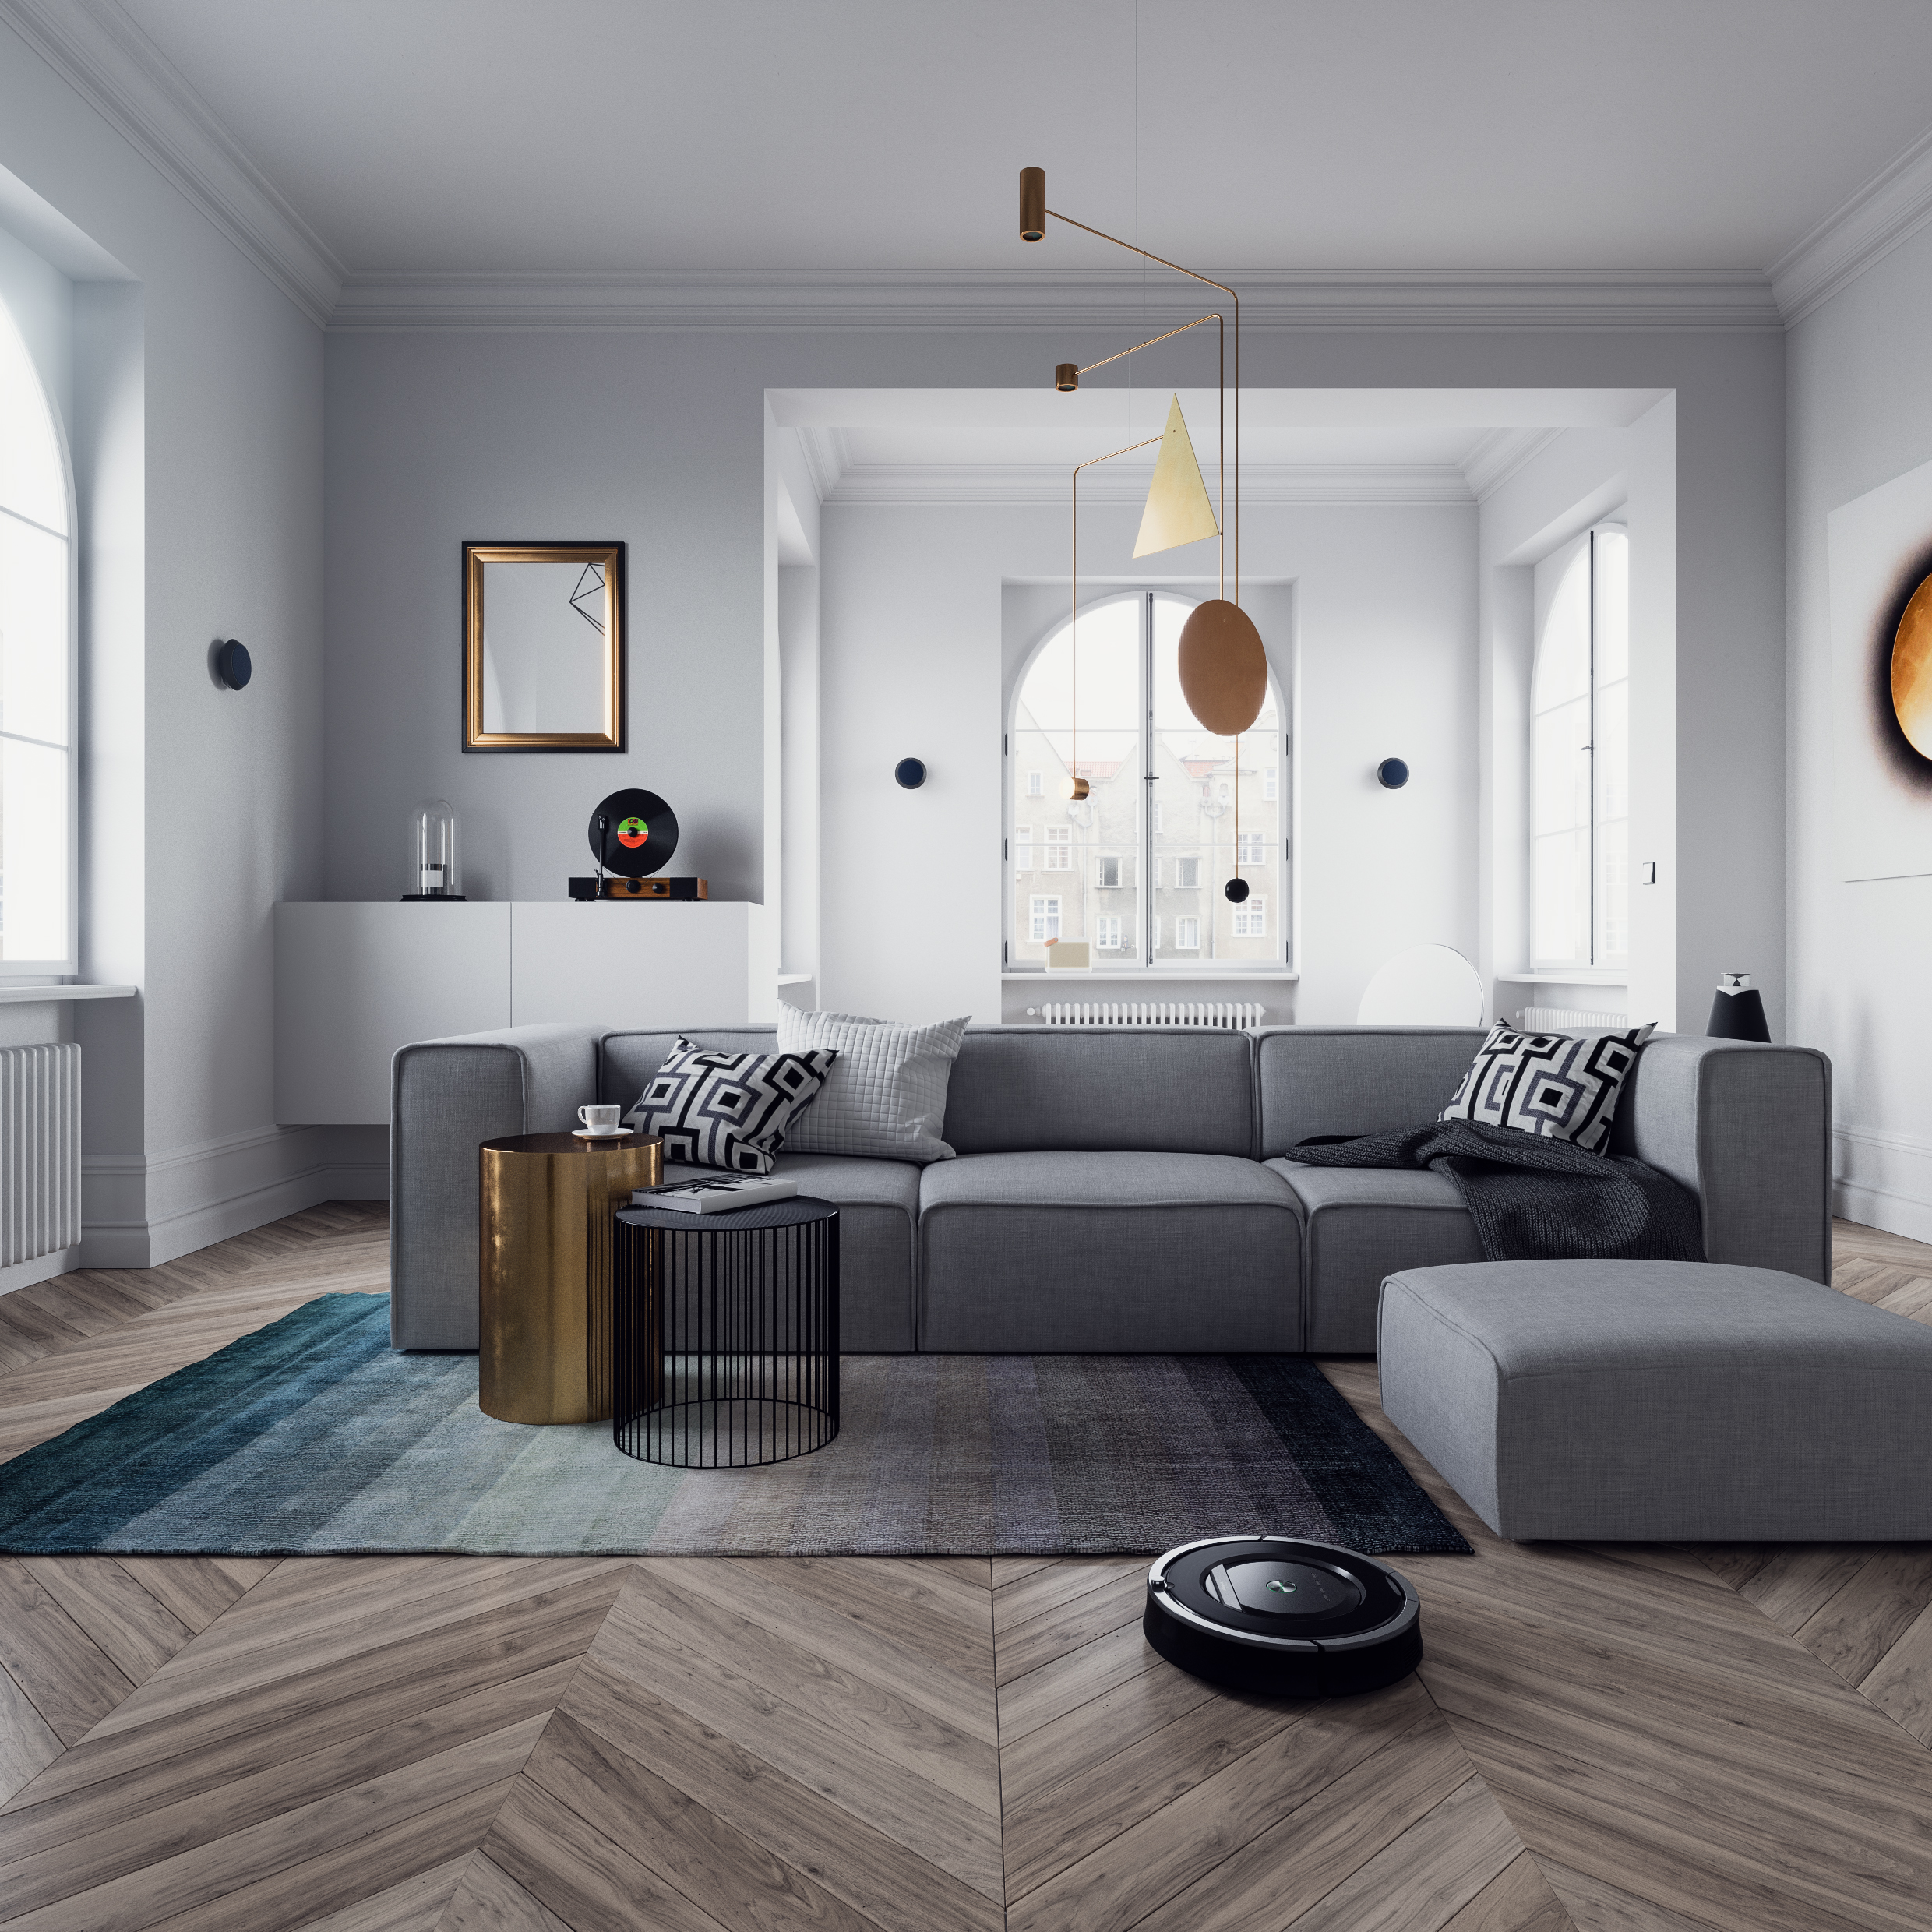 Modeling an Interior Scene from Photo Reference in 3ds Max  Pluralsight